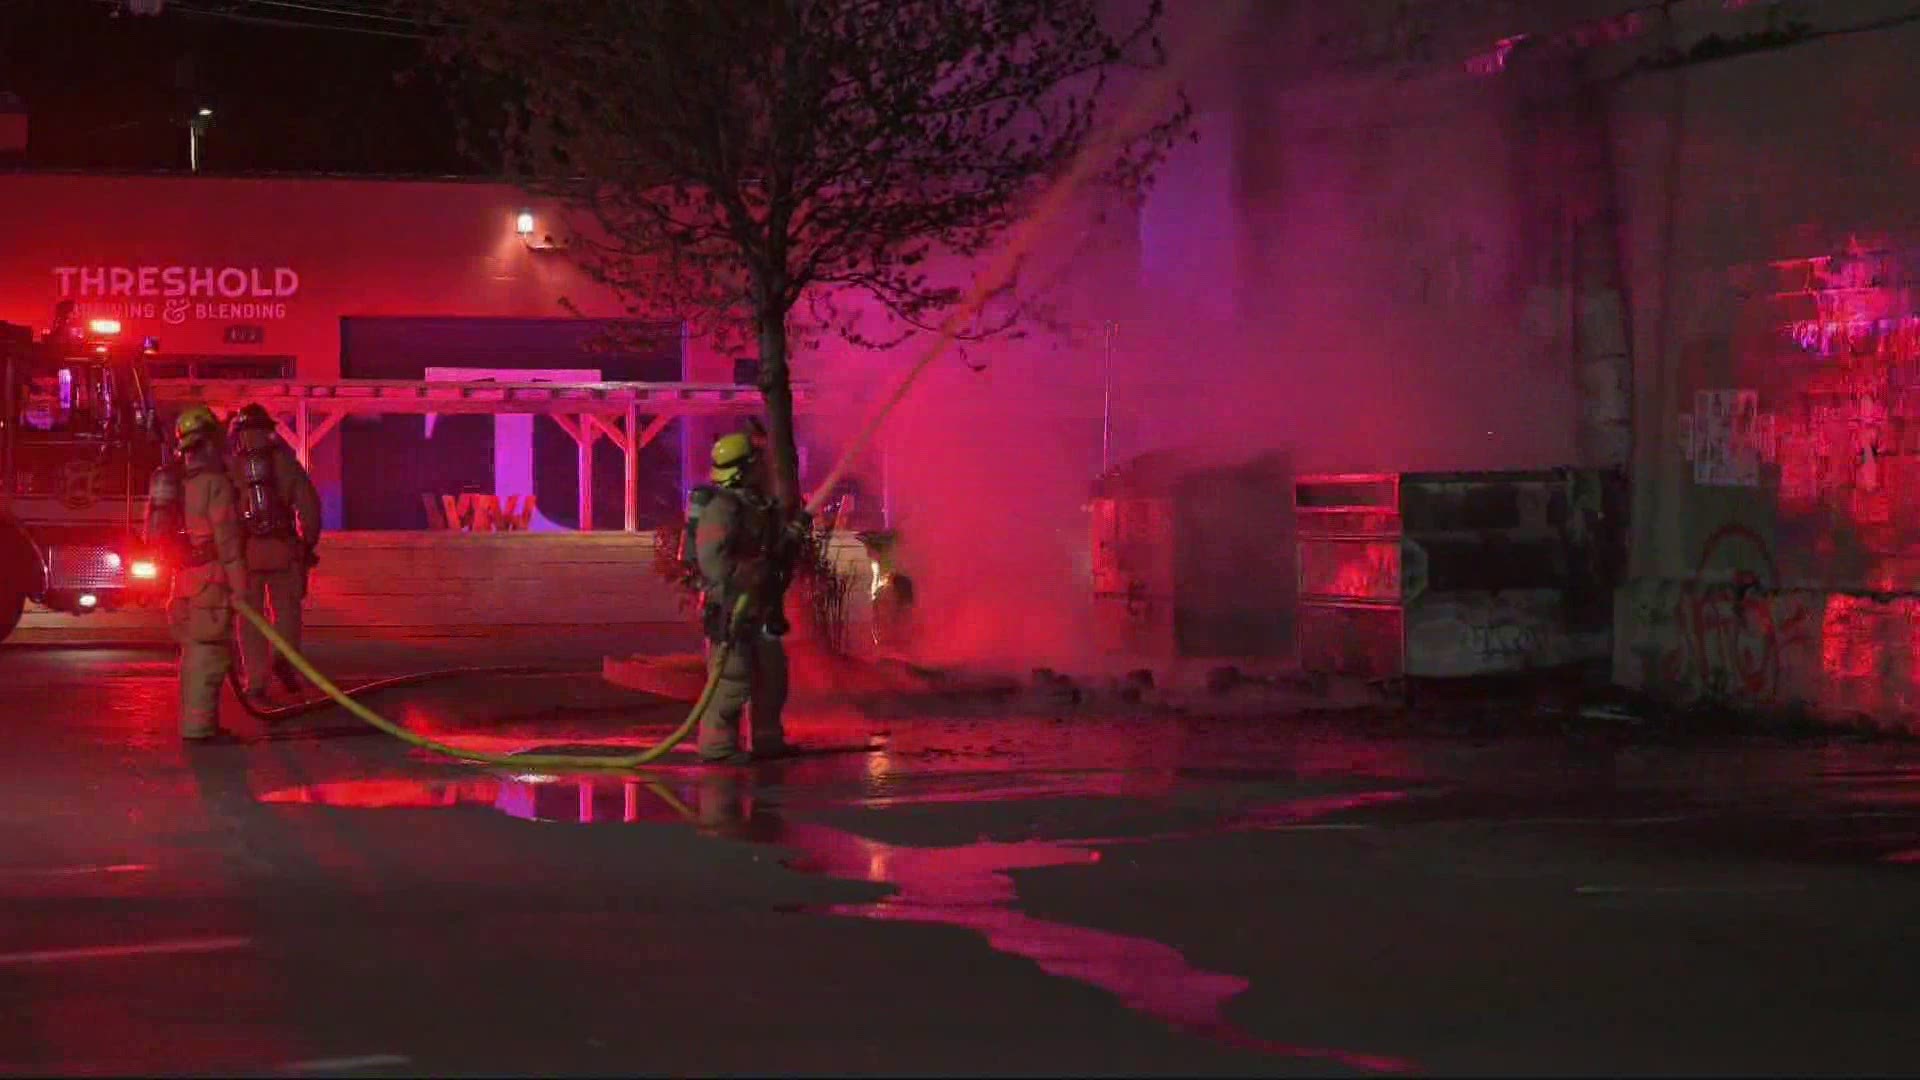 It took nearly 100 firefighters and a majority of the fire stations in the city to put out the fire in Southeast Portland on April 19.